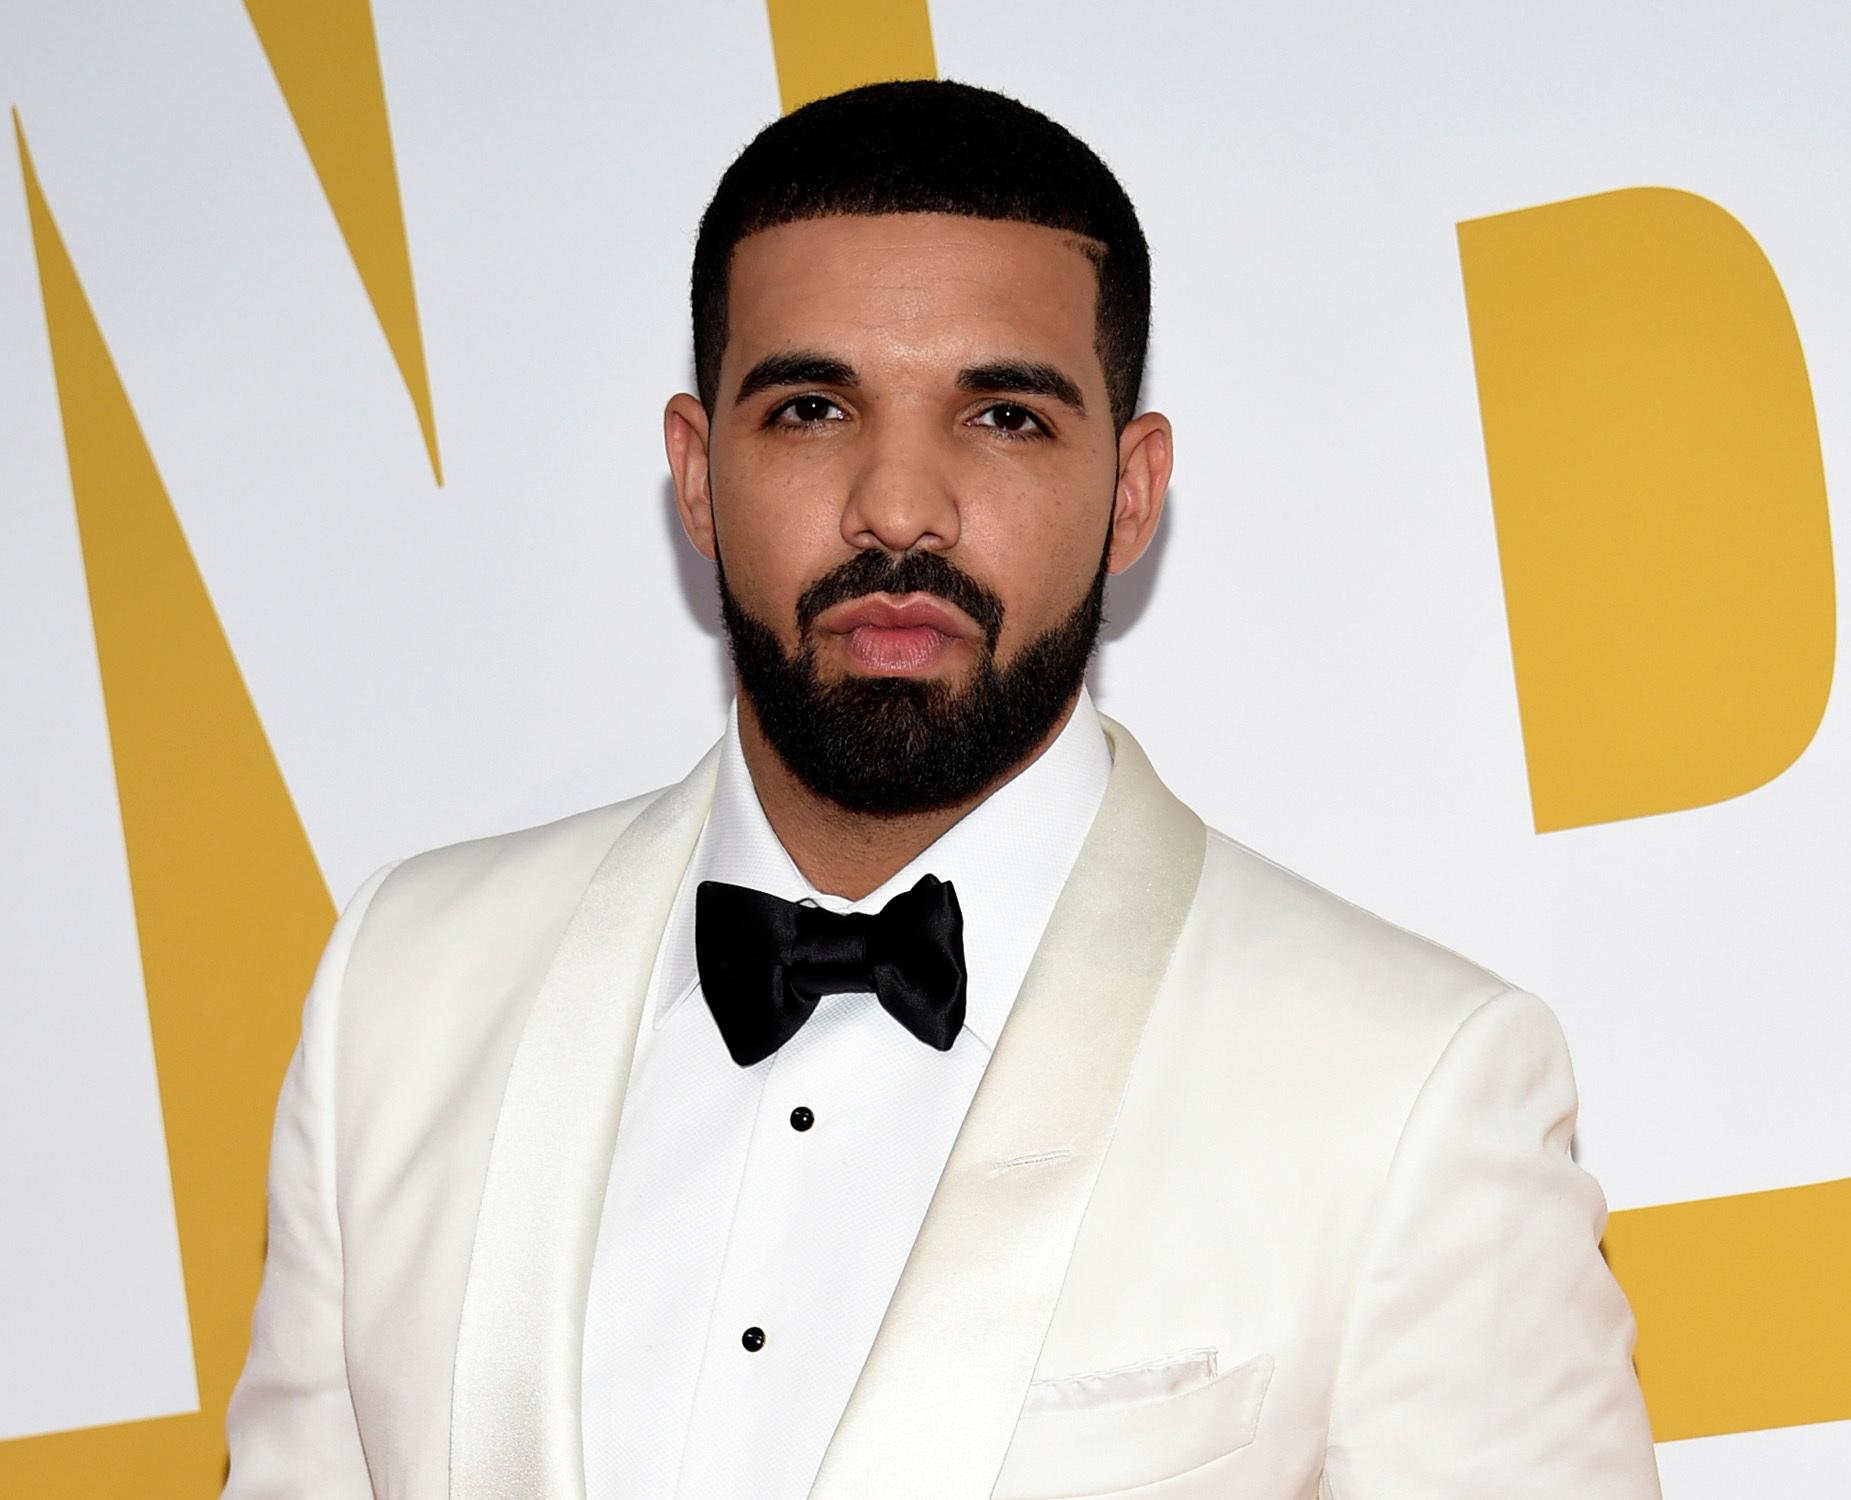 FILE - In this June 26, 2017 file photo, Canadian rapper Drake arrives at the NBA Awards in New York. Drake's song "In My Feelings,"  was named as one of the top songs of the year by Associated Press Music Editor Mesfin Fekadu. (Photo by Evan Agostini/Invision/AP, File)